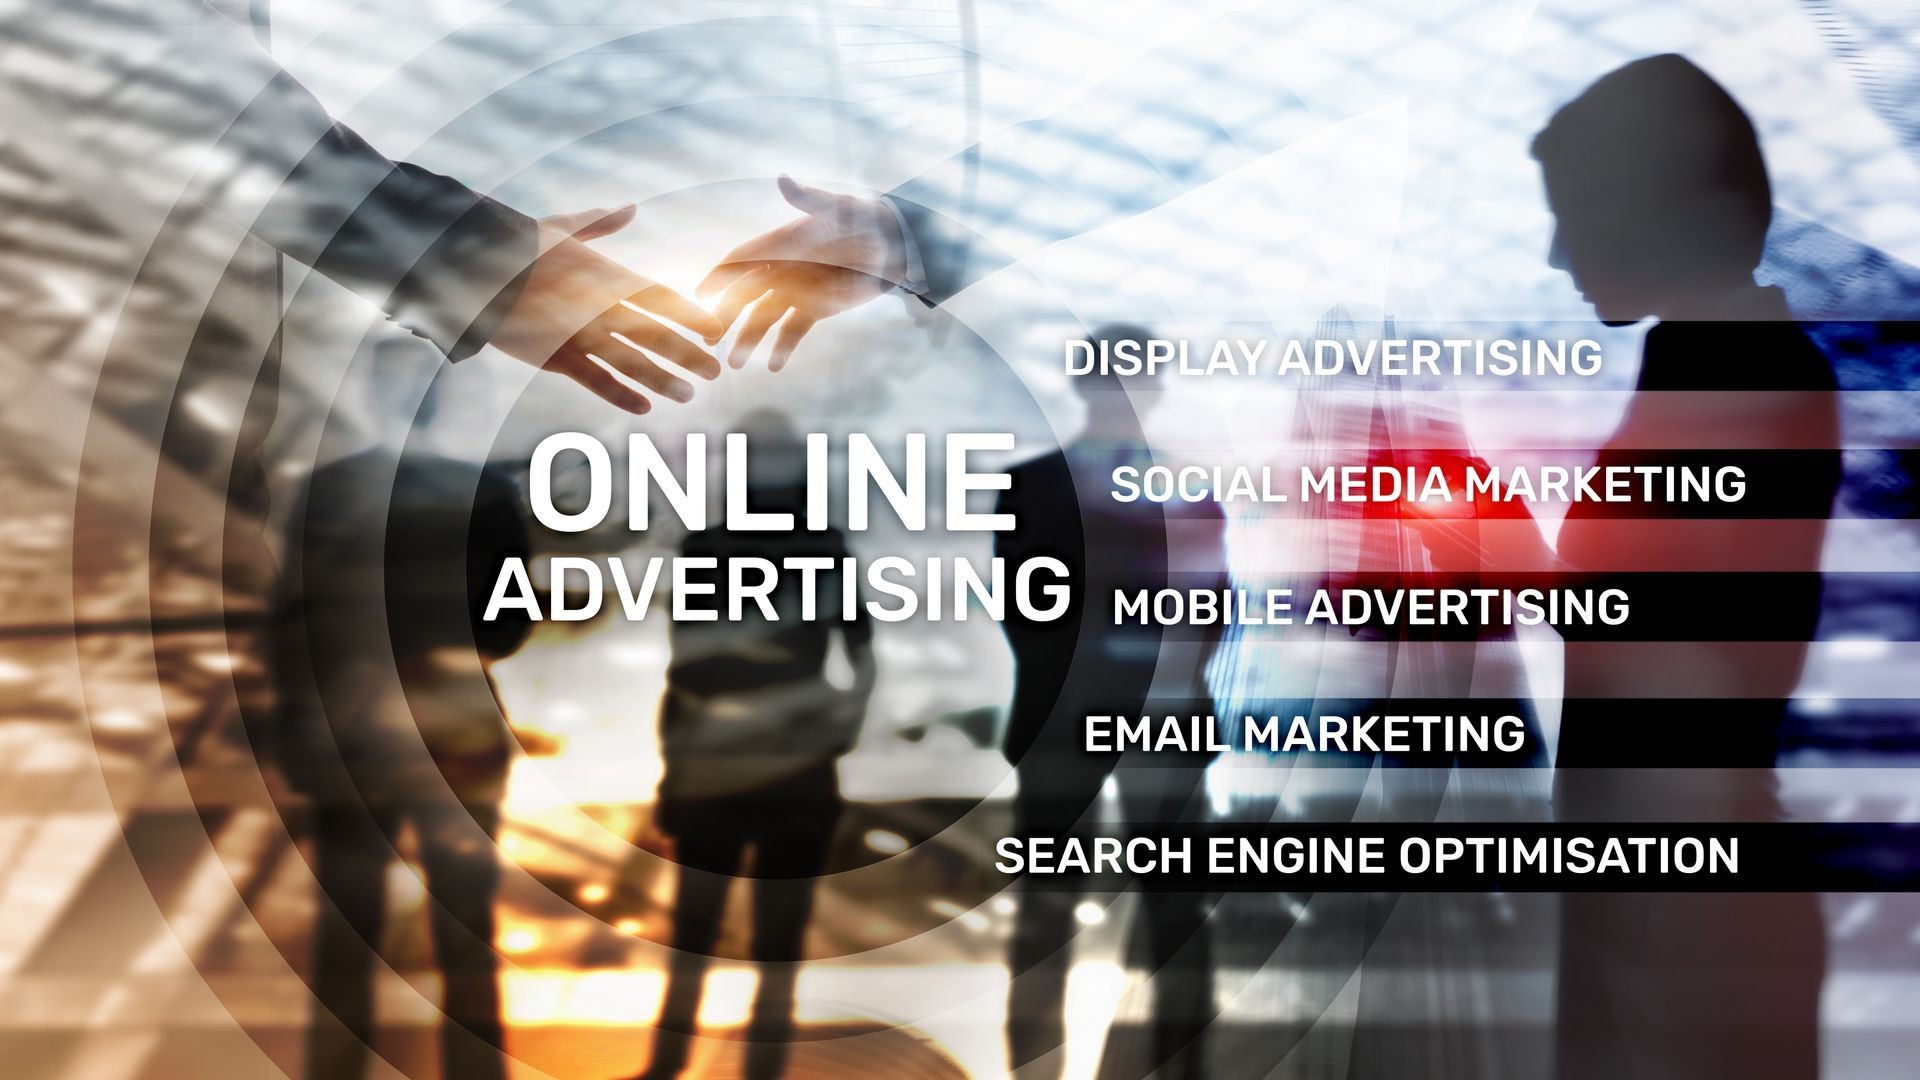 Online advertising, Digital marketing. Business and finance concept on virtual screen